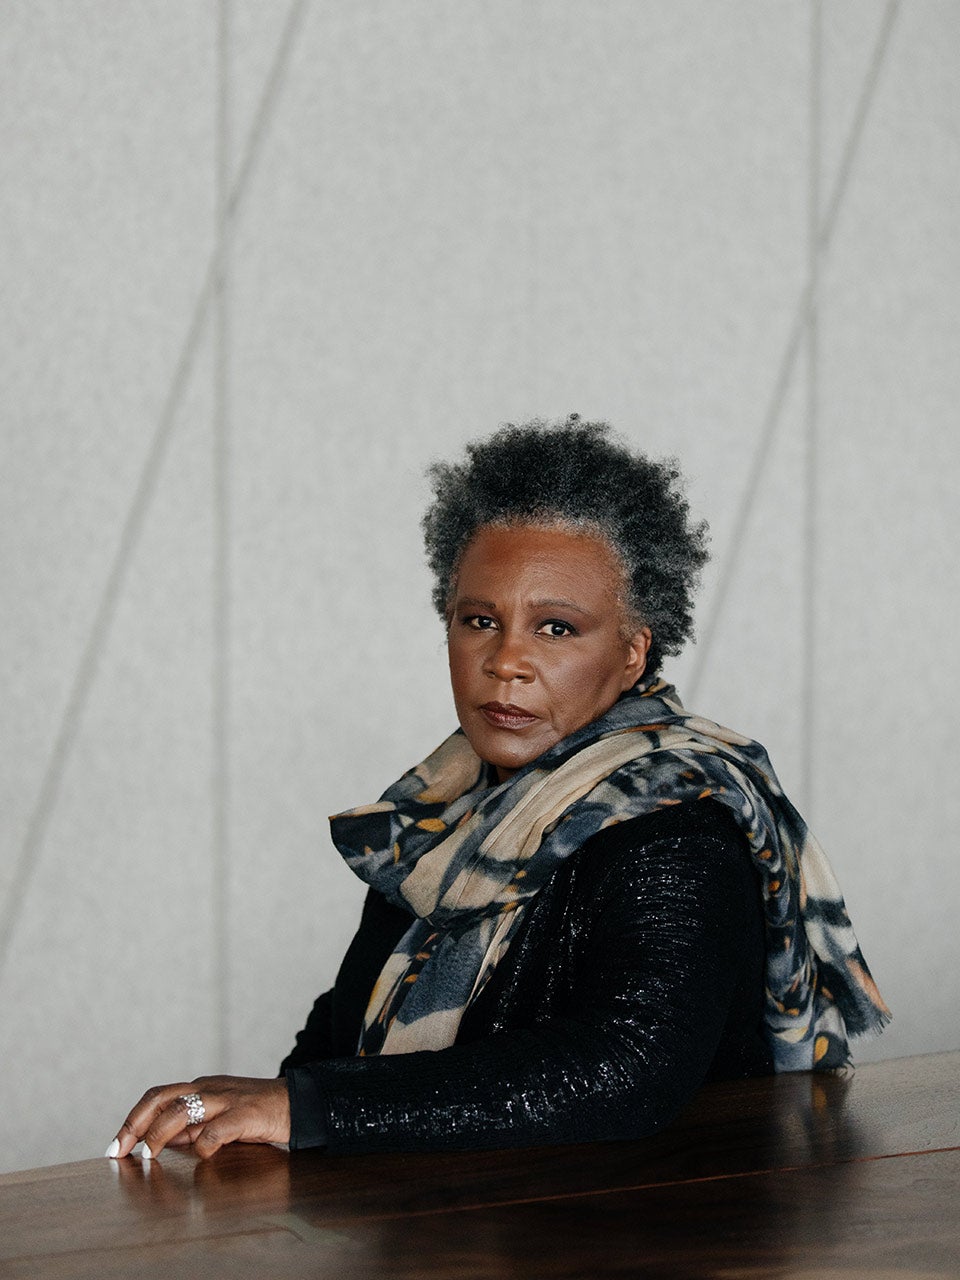 Claudia Rankine: “Eventually they’re coming for you too”